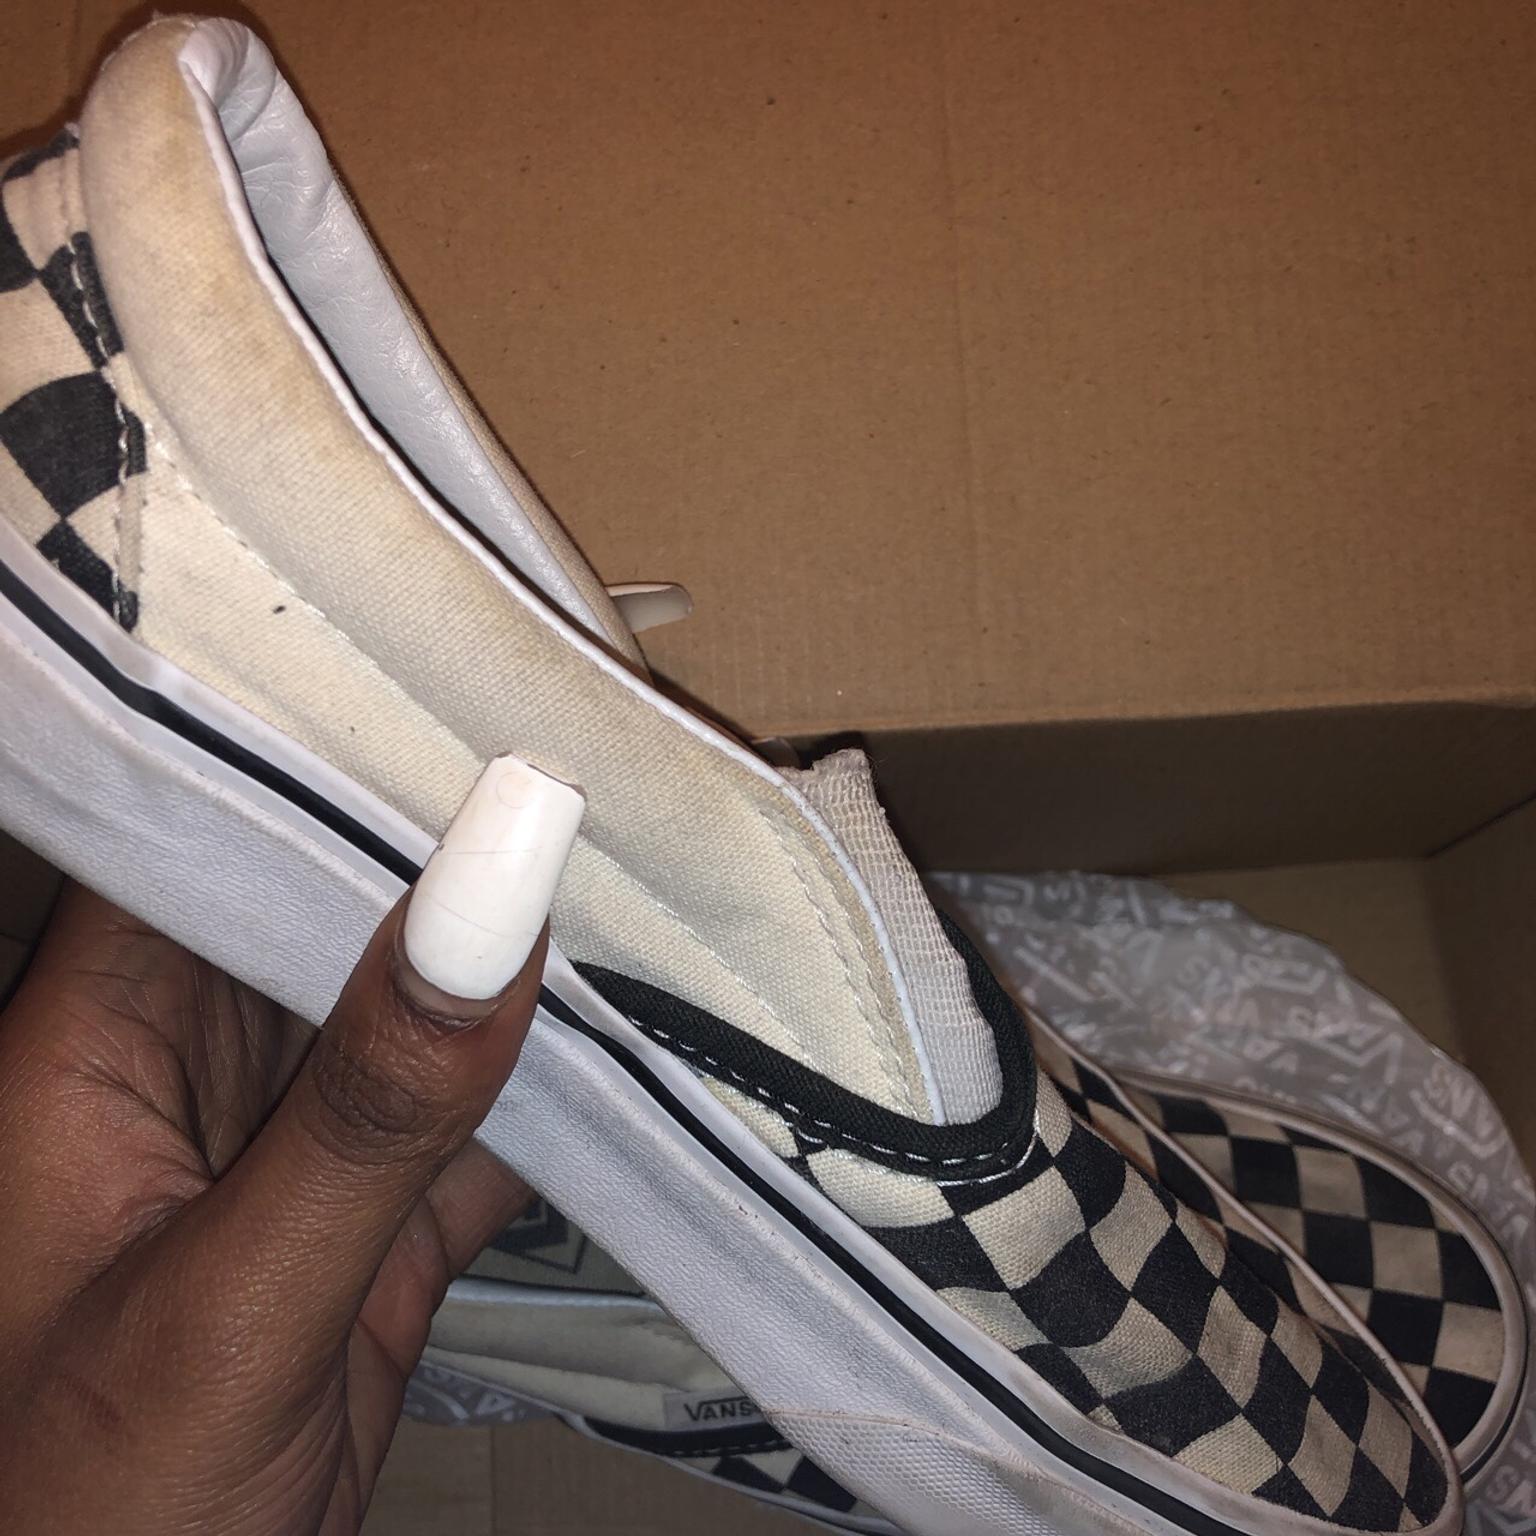 how to wash checkered vans